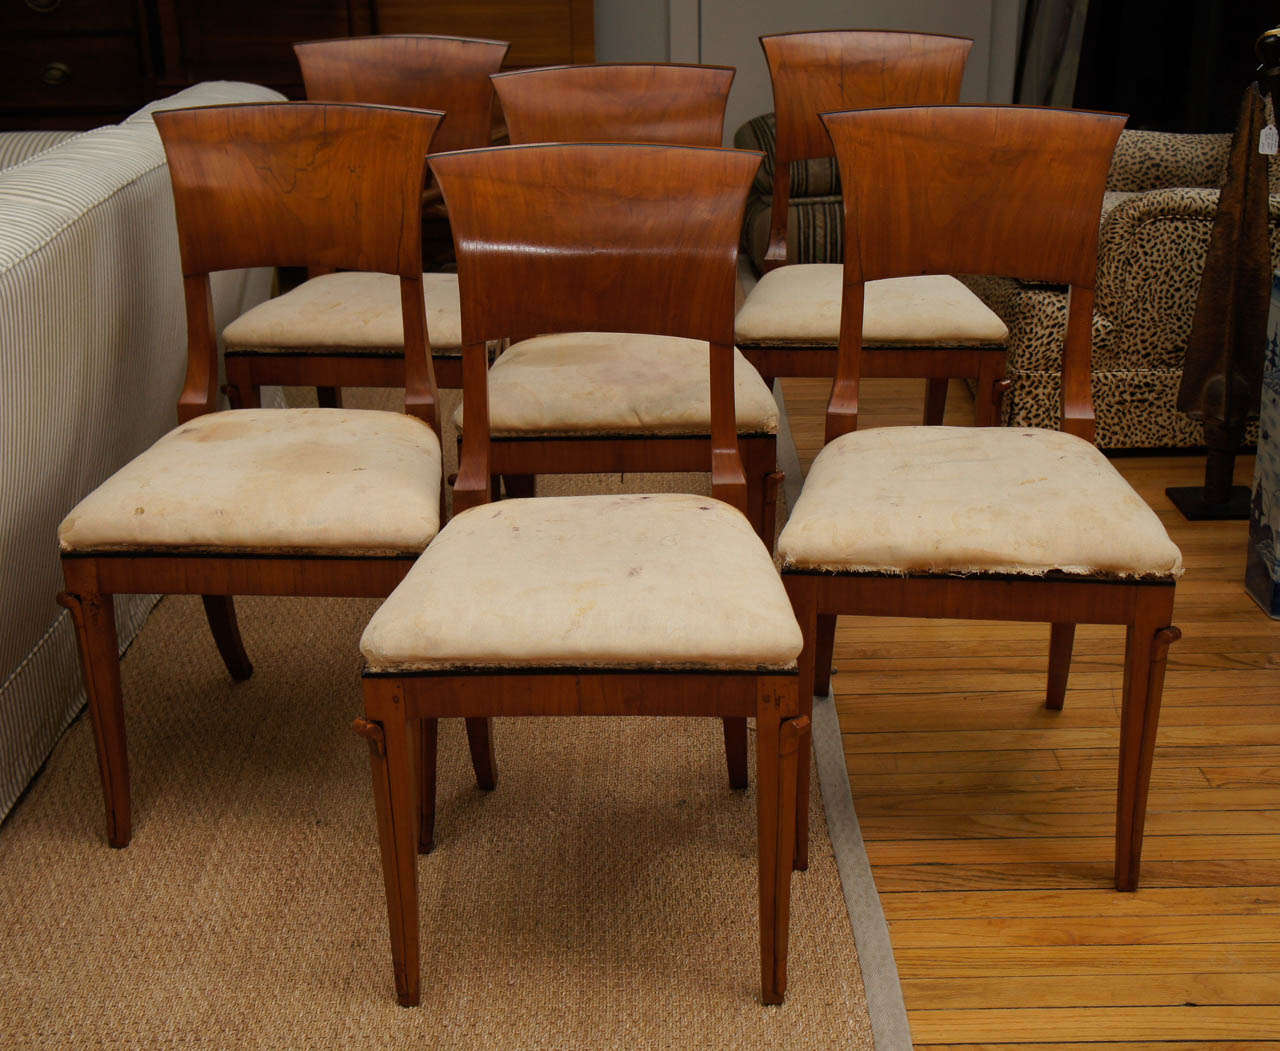 Set of six Italian Empire walnut chairs with finely carved details.
Original seats need reupholstering.
34